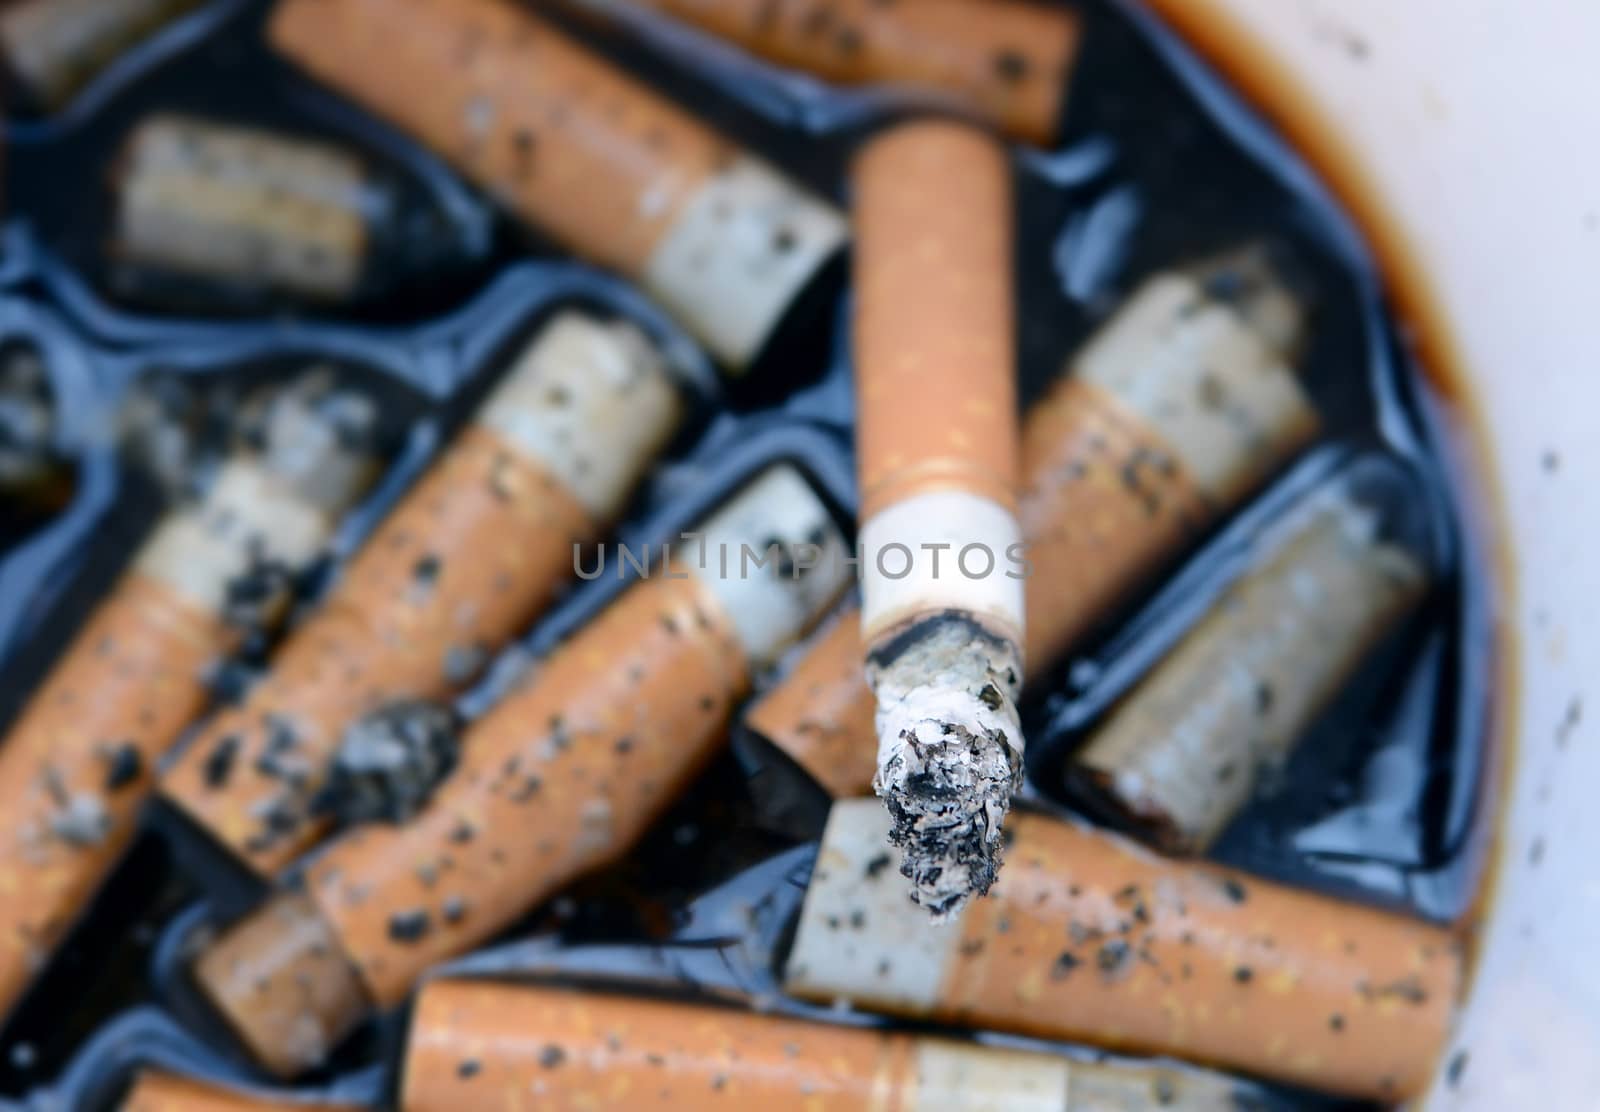 Ashtray Full of Cigarettes burnt butts by ocusfocus